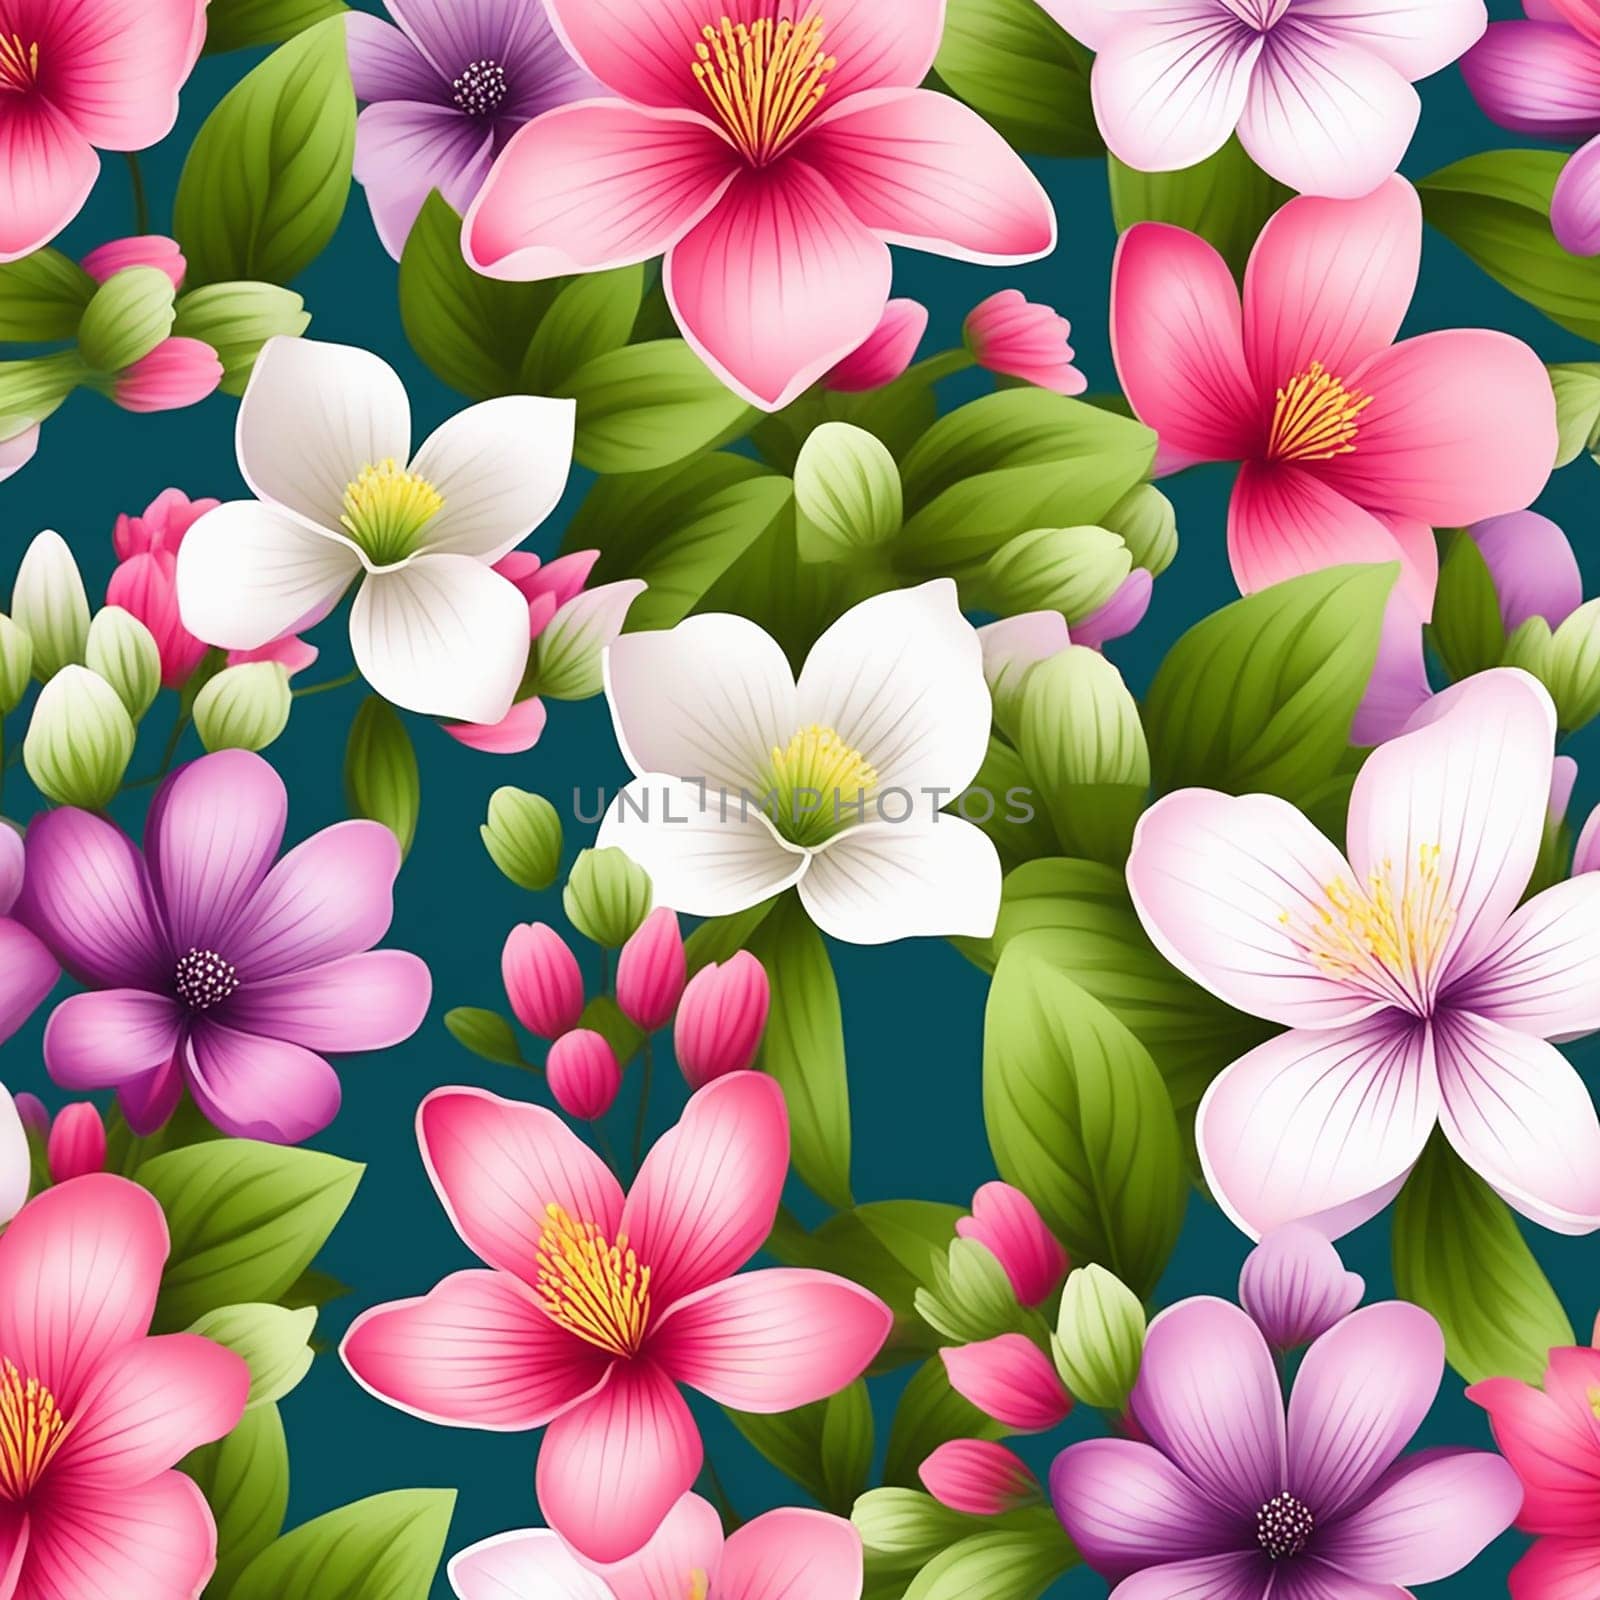 Whimsical Blooms: Pastel Flower Spring Background by Petrichor